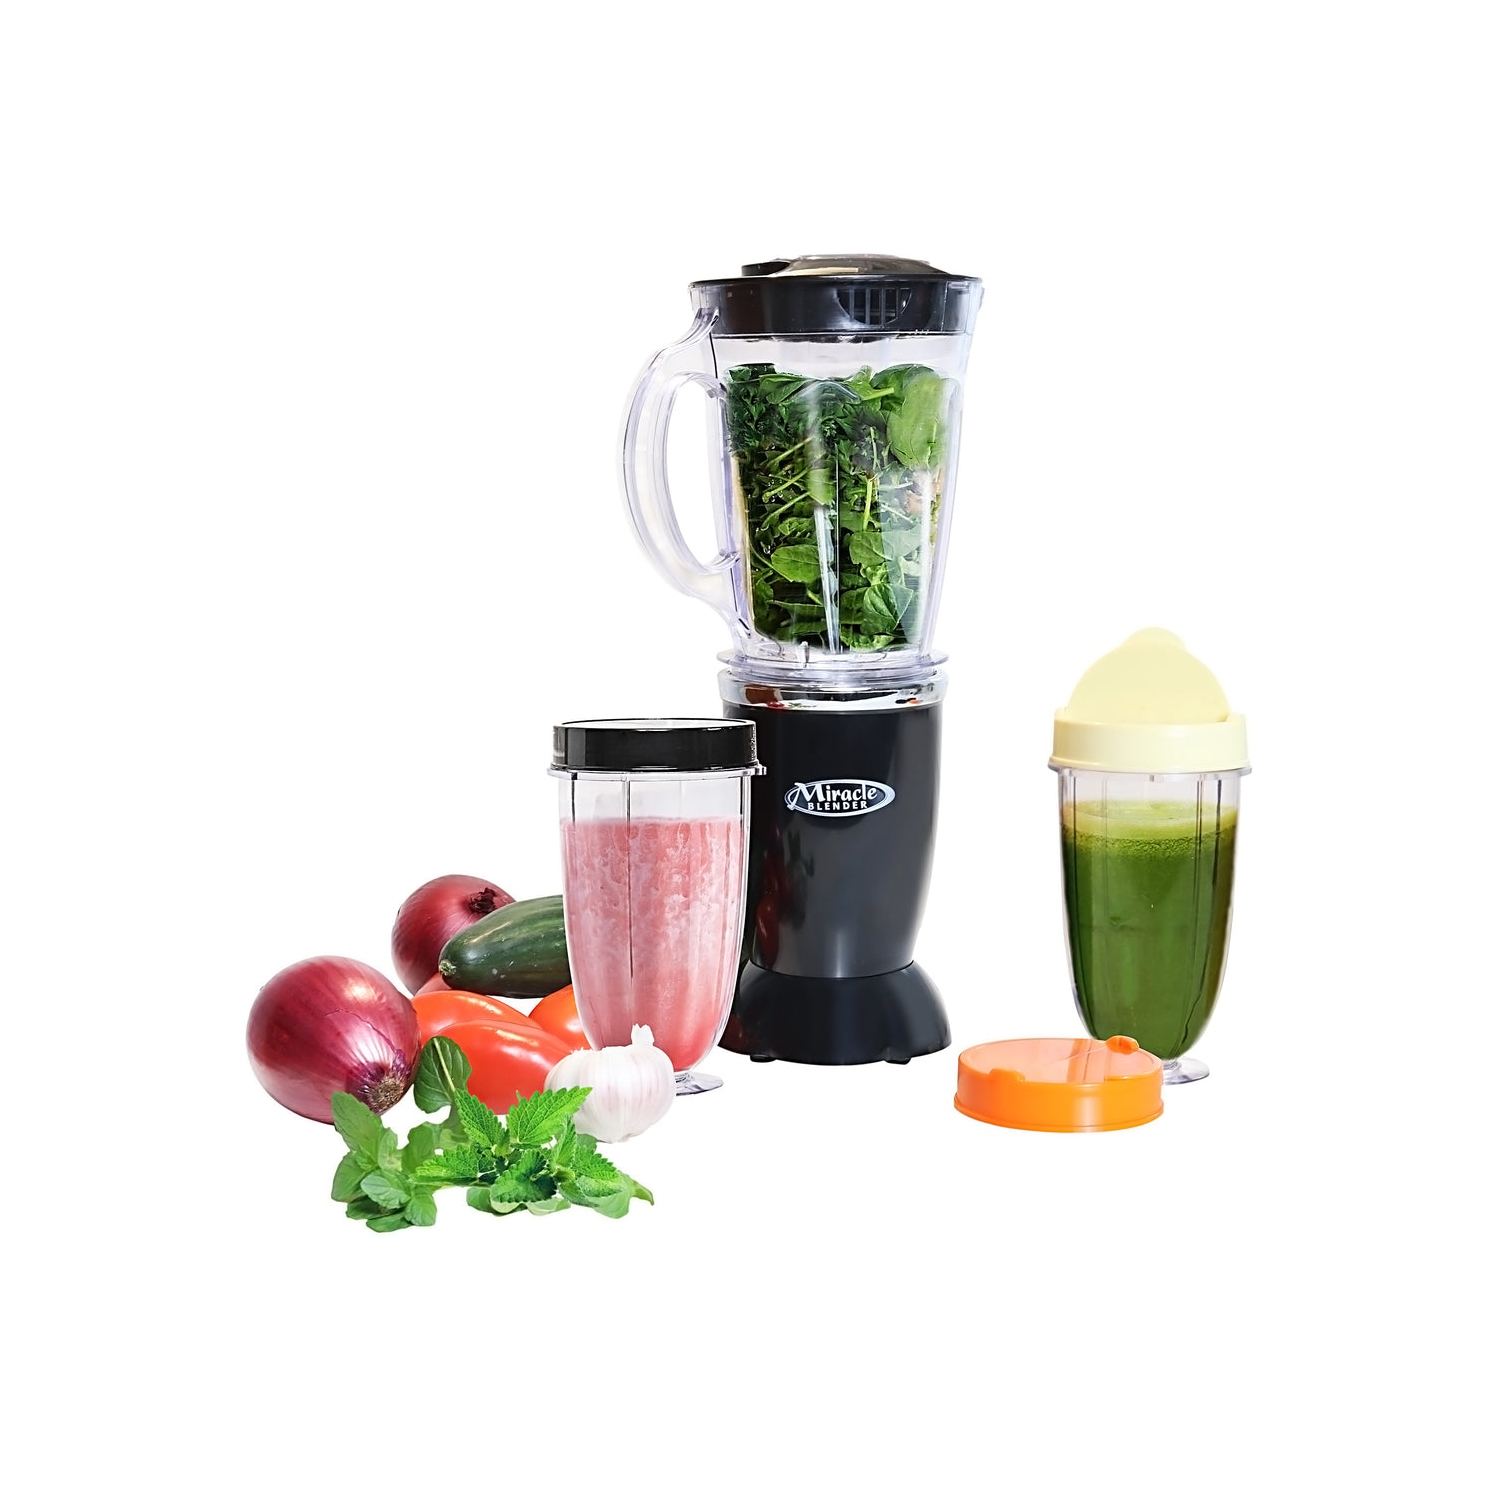 Total Chef Miracle Blender, 12 pc Bullet Blender Set with Heavy Duty Quad Blade, 1L Carafe, Travel Cups and Lids, Dishwasher-Safe Accessories, for smoothies, shakes, sauces